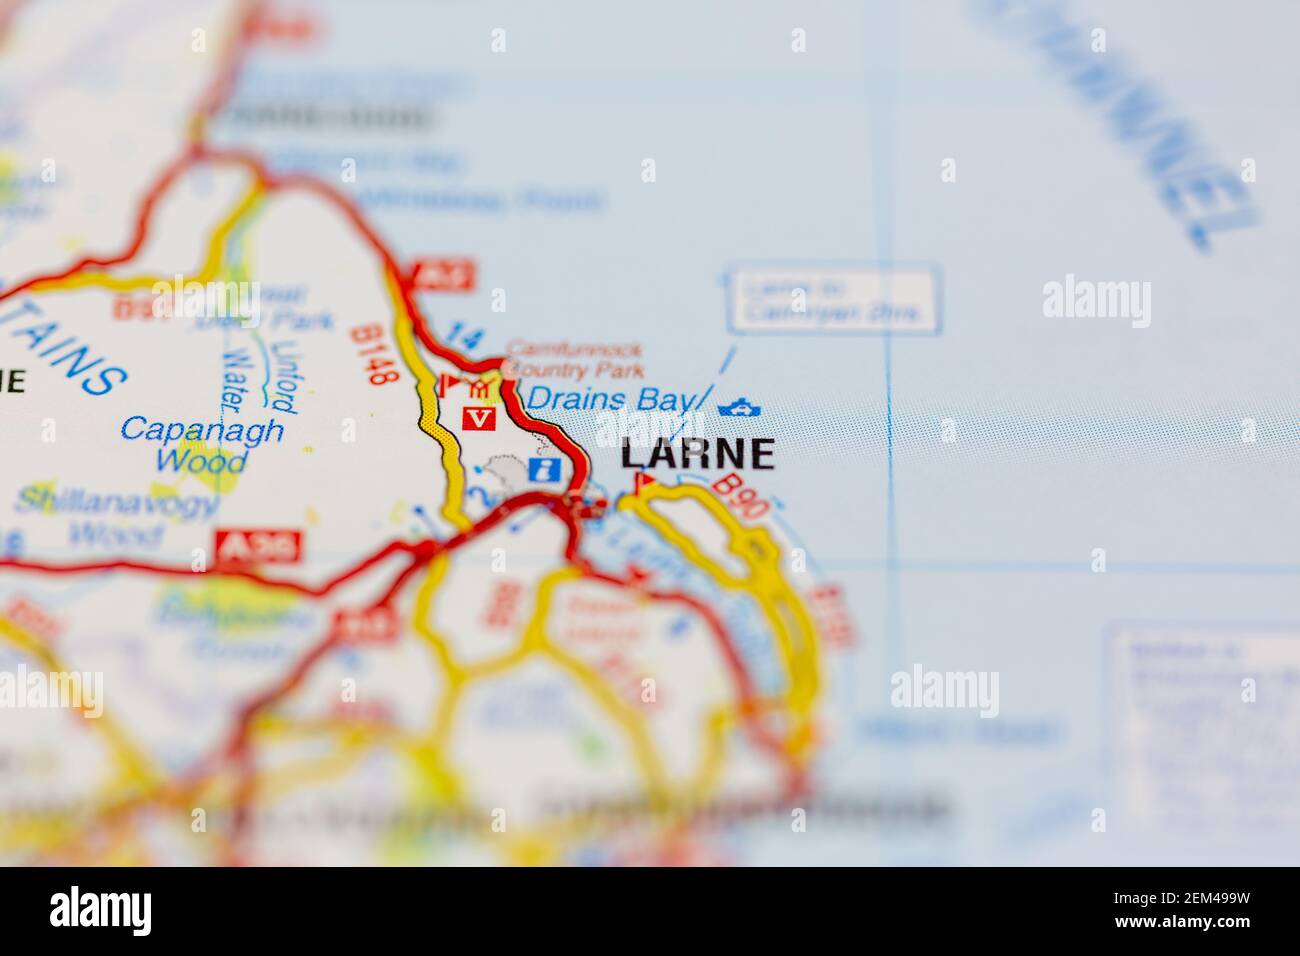 Larne shown on a road map or geography map Stock Photo